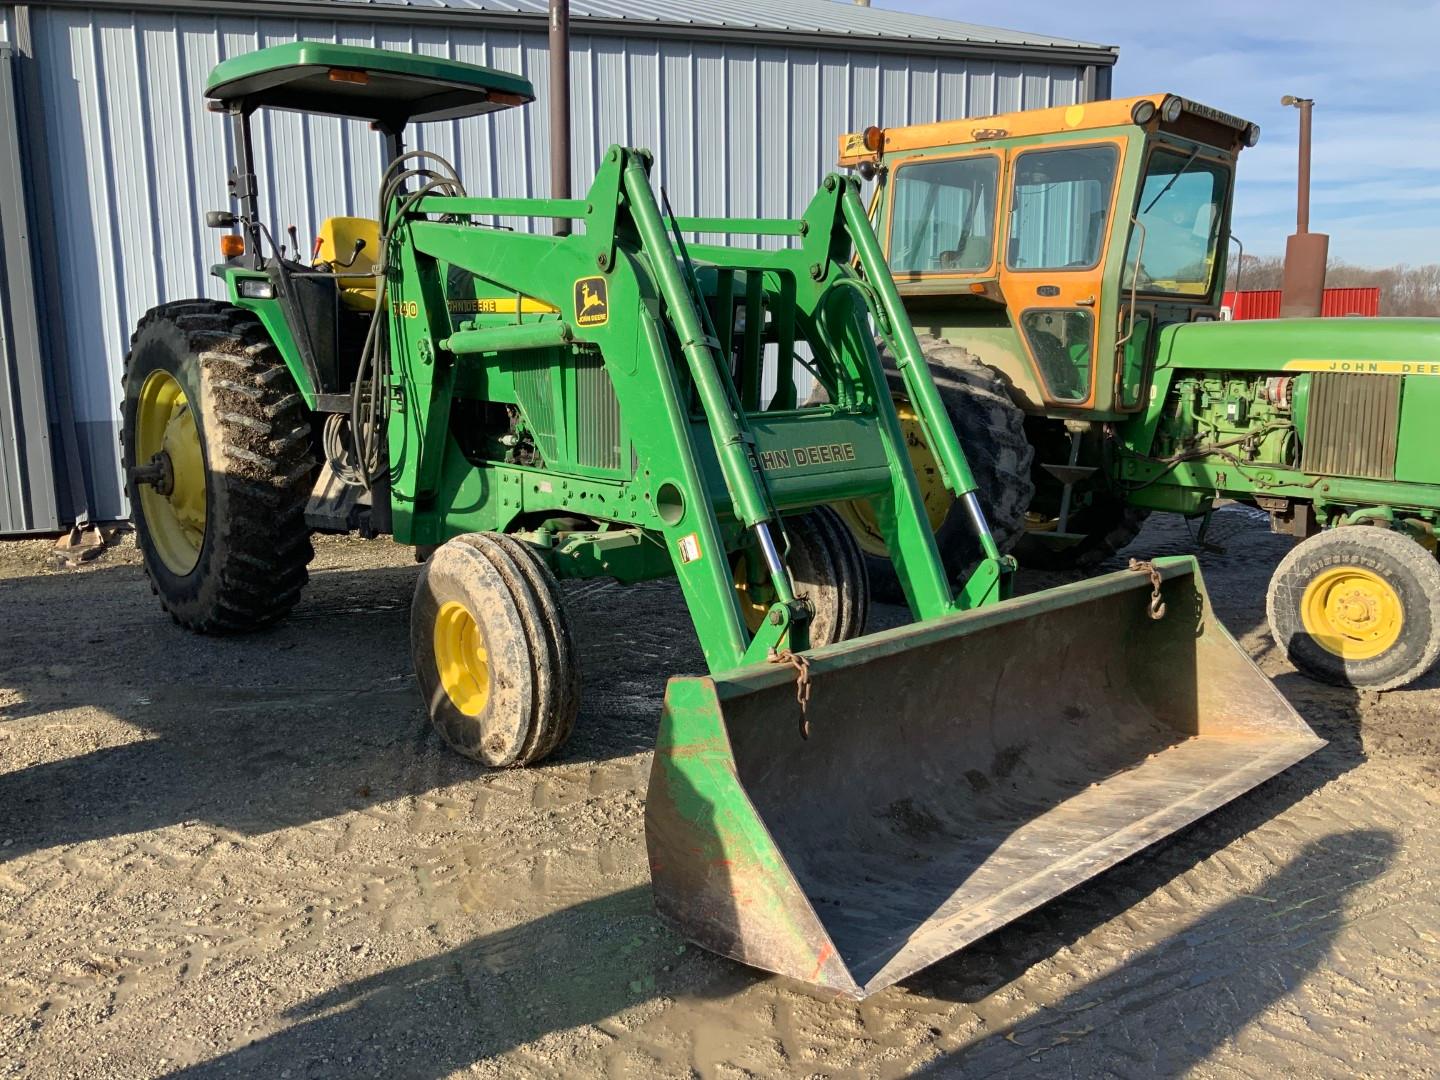 ’98 JOHN DEERE 7710 Open Station 2WD w/ROPS, quick hitch, 2 SCV’s, 18.4-42 rear & 11.00-16 front rub